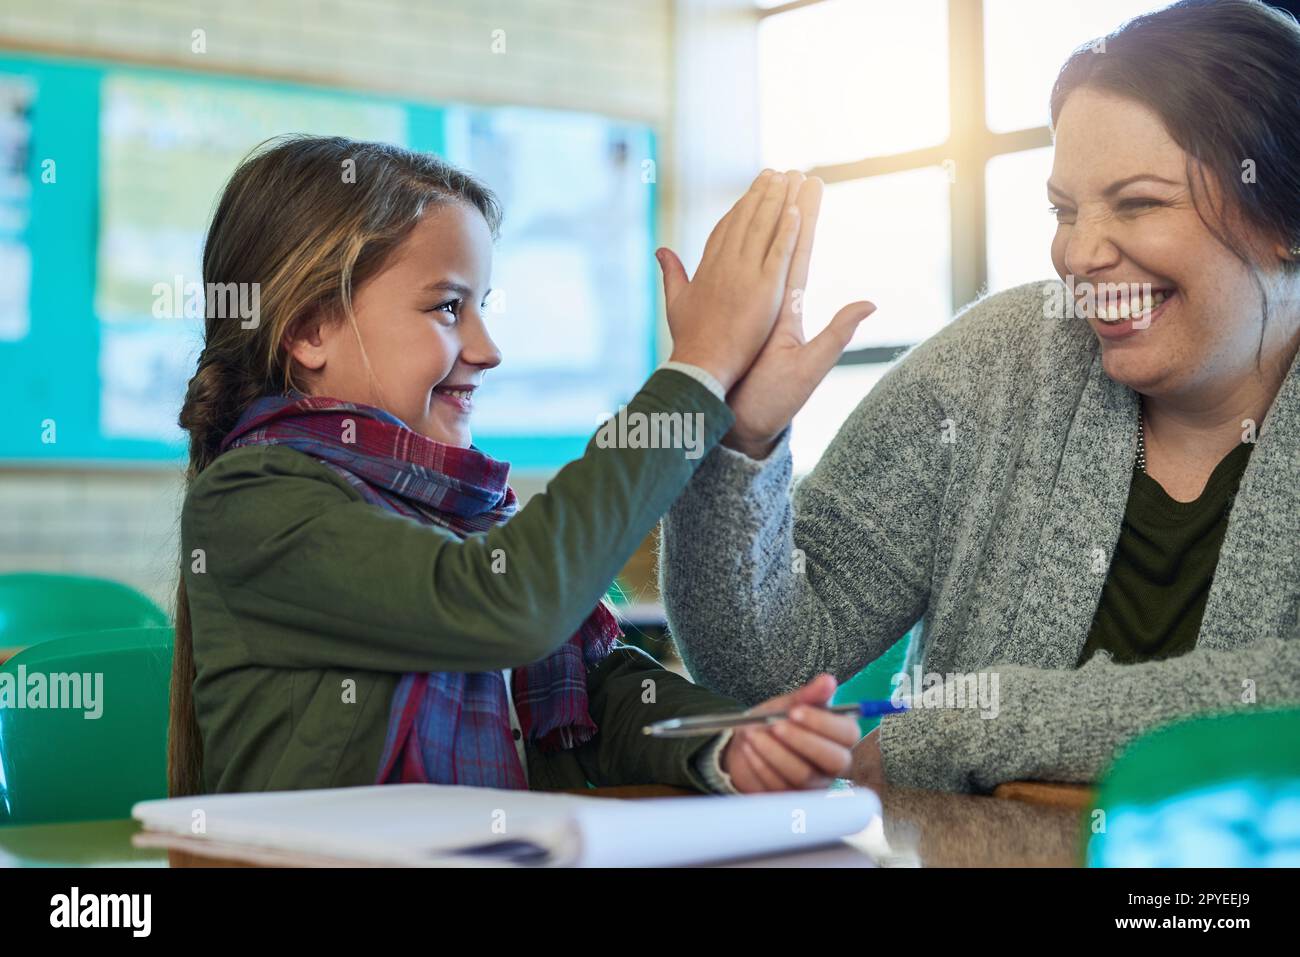 Becoming a top student with the help of her teacher. an elementary school girl high fiving her teacher in class. Stock Photo